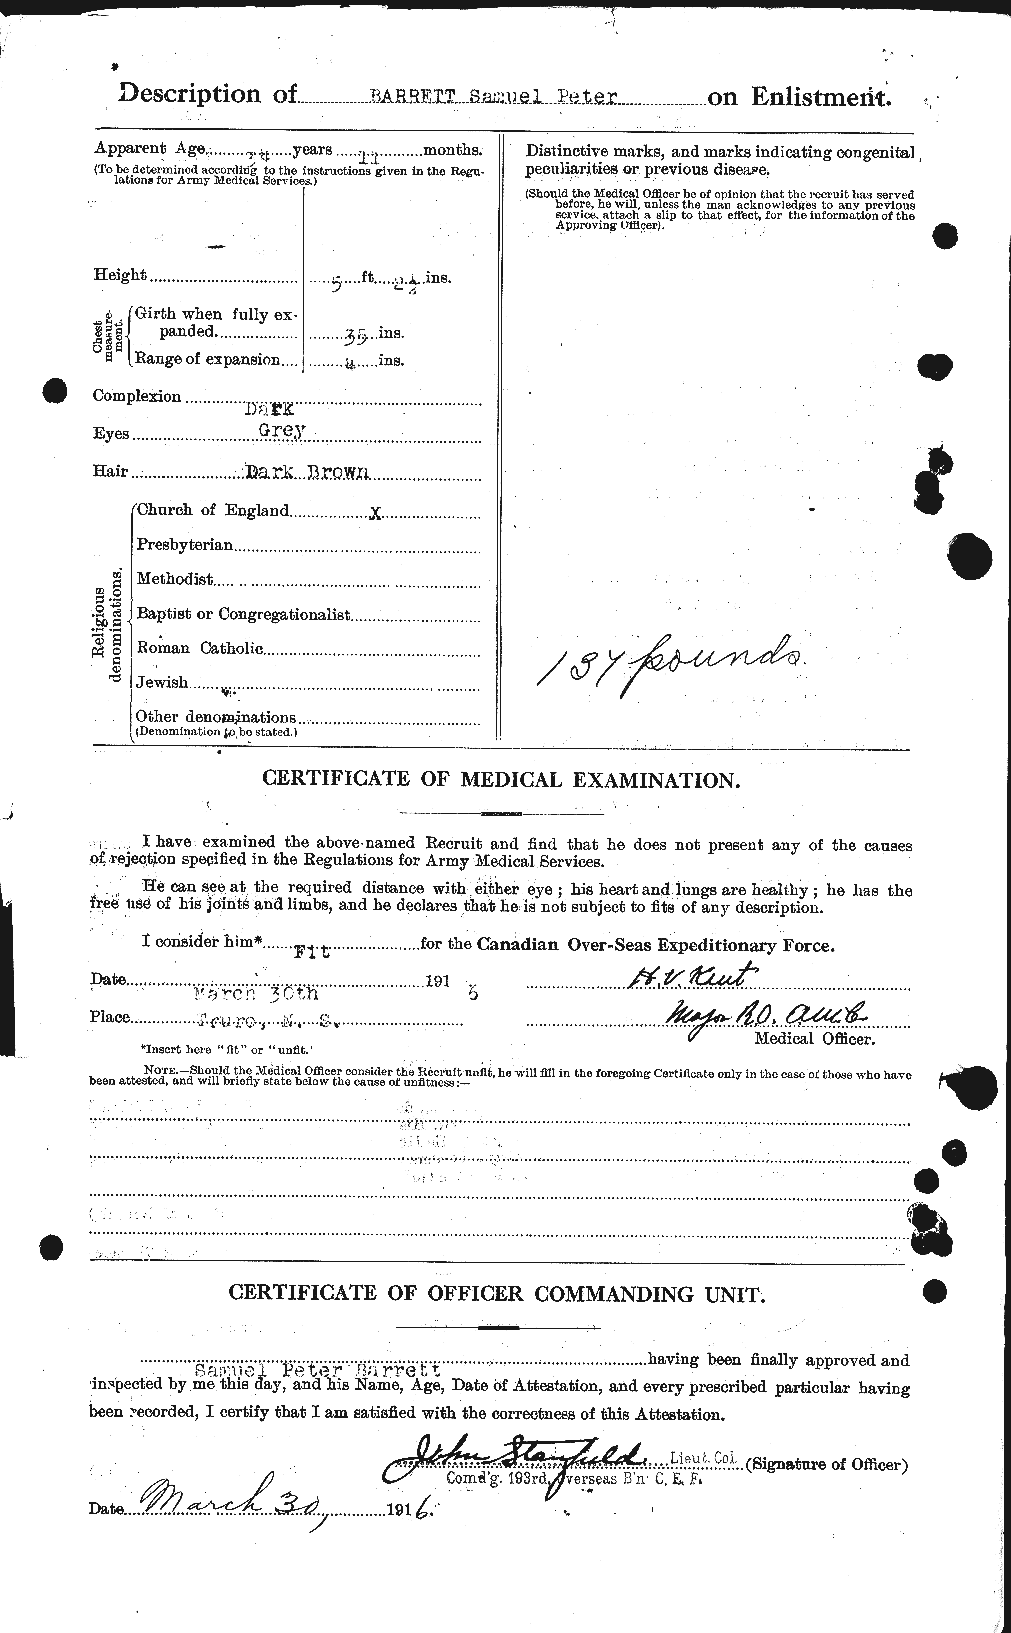 Personnel Records of the First World War - CEF 220182b